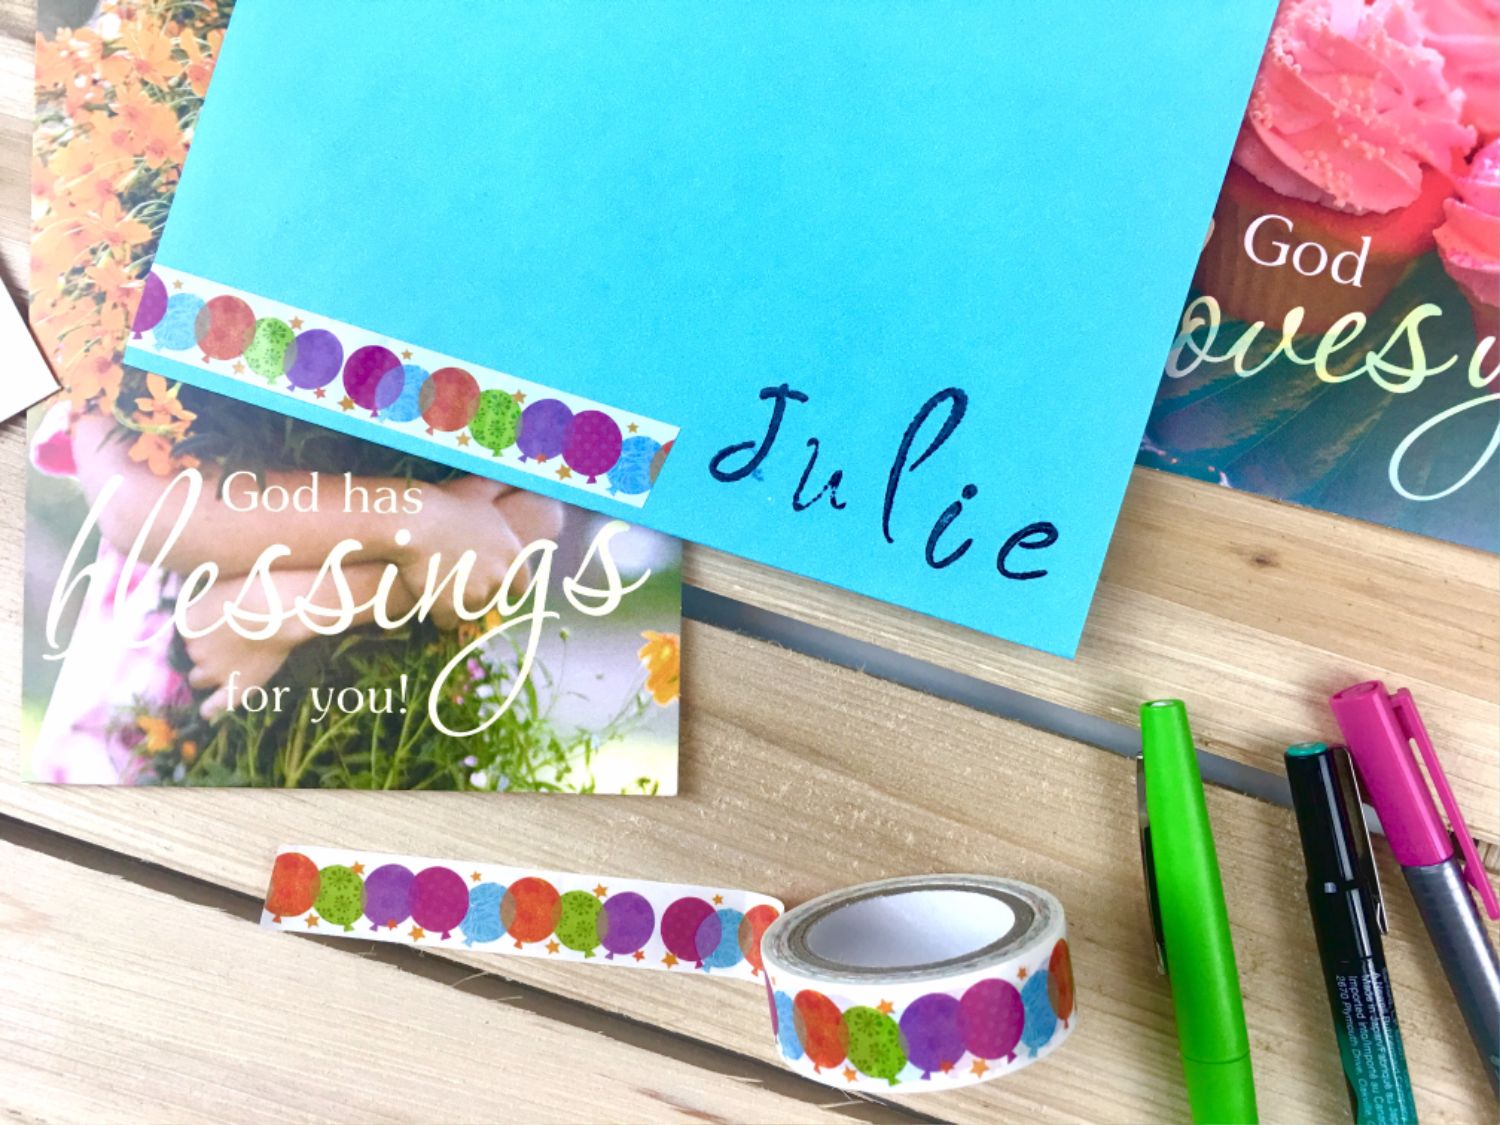 Bringing Back Handwritten Cards by Adding an Artistic Touch 